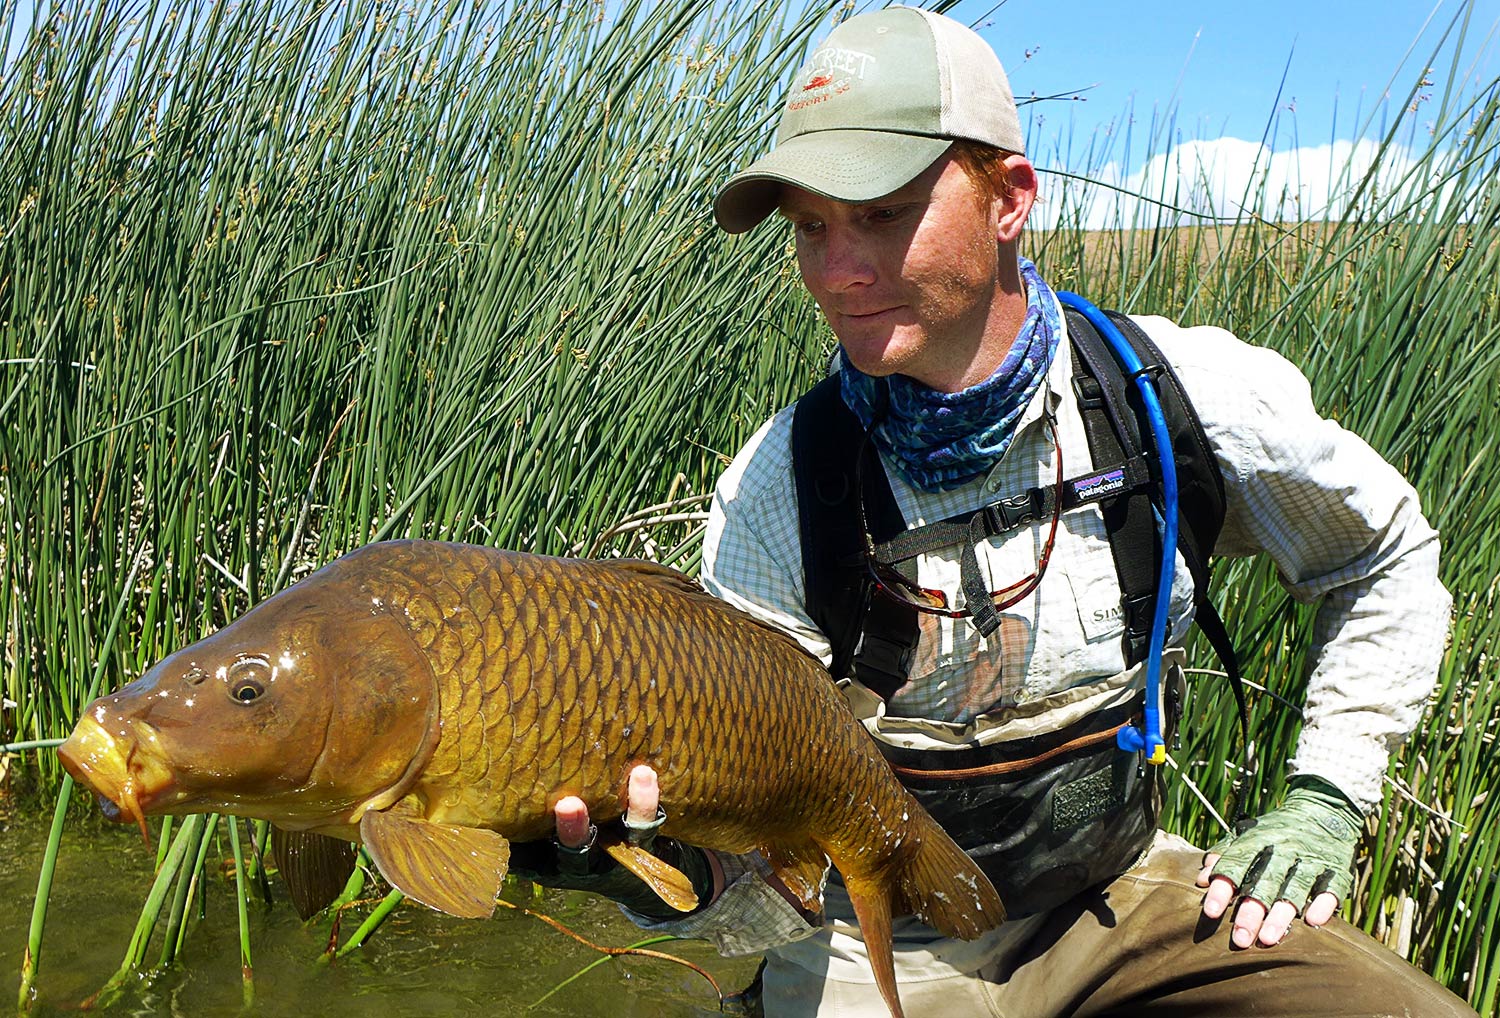 Finding the Hidden Carp - Fly Fishing, Gink and Gasoline, How to Fly Fish, Trout Fishing, Fly Tying